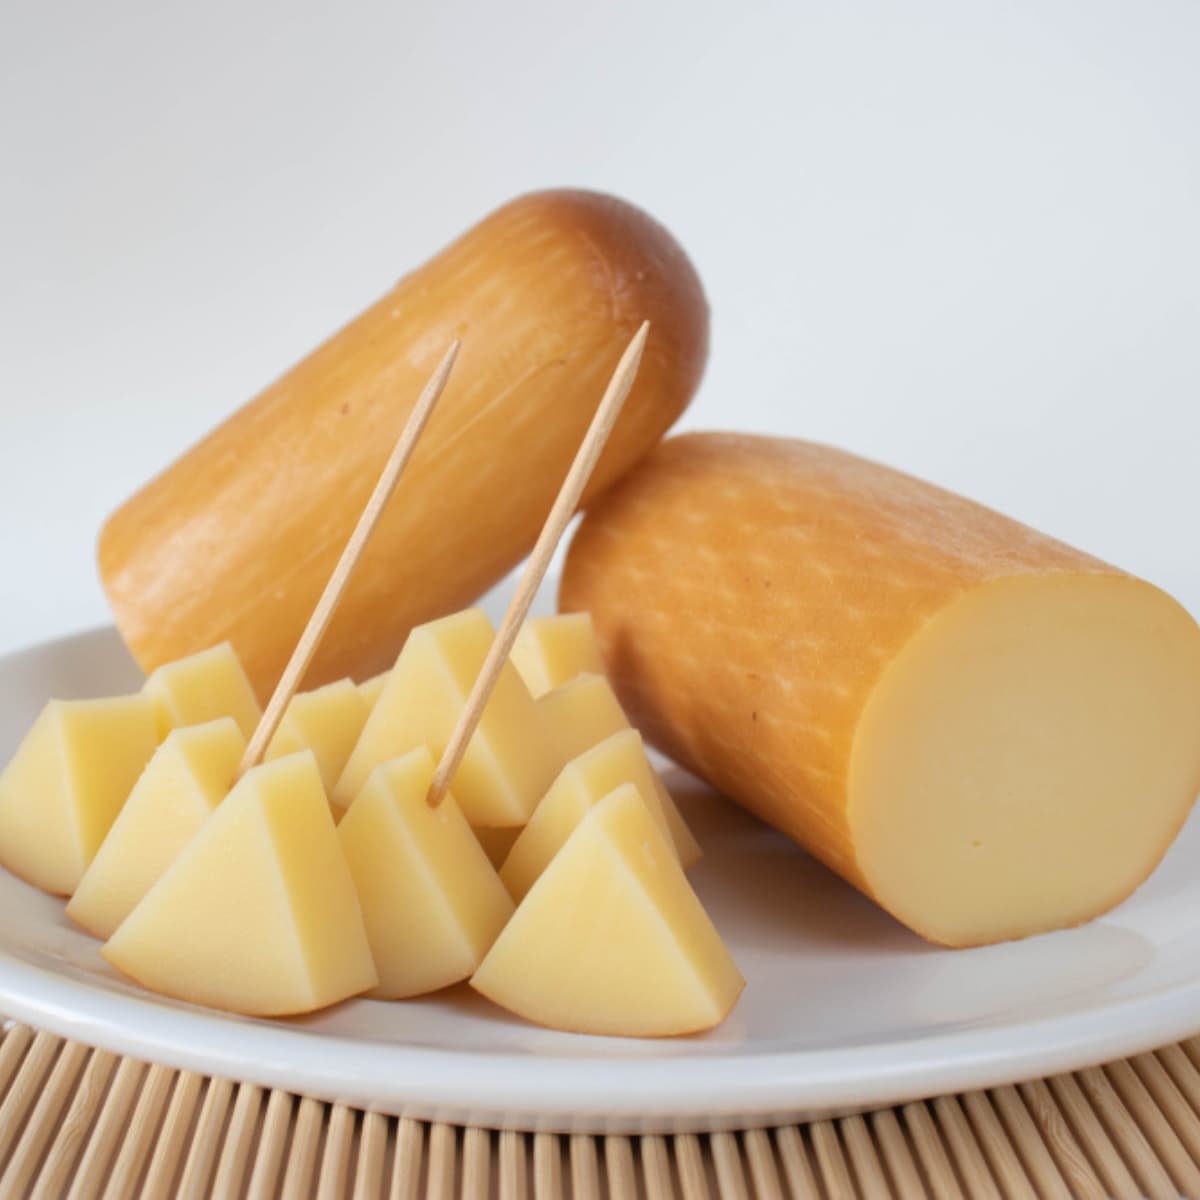 Provolone Cheese Rounds and Triangles on a Plate